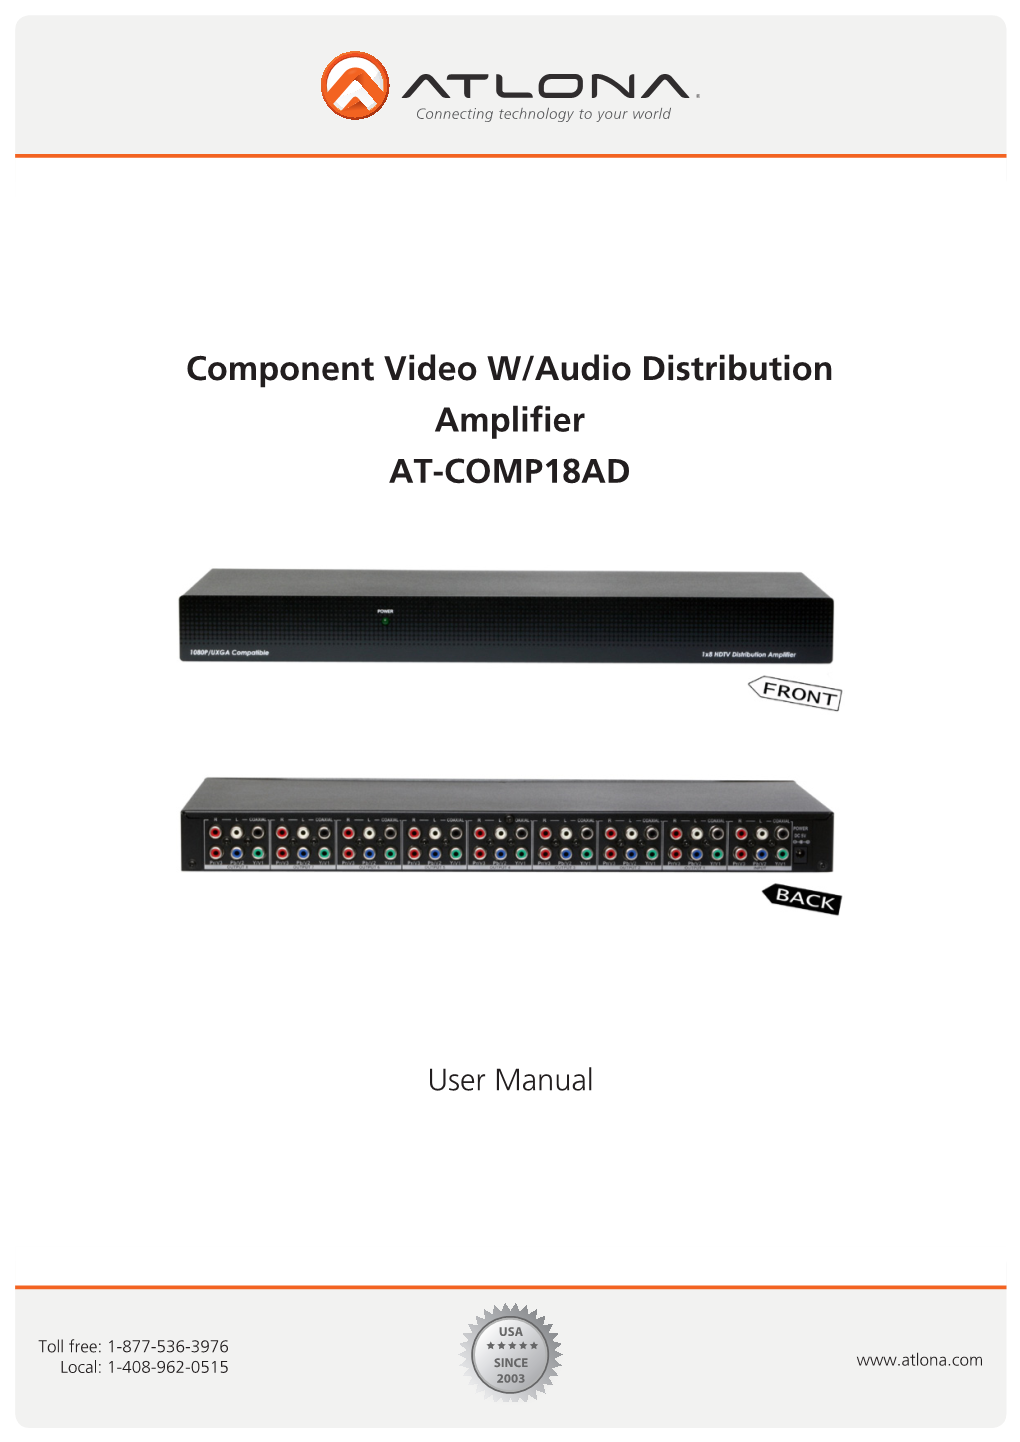 Component Video W/Audio Distribution Amplifier AT-COMP18AD